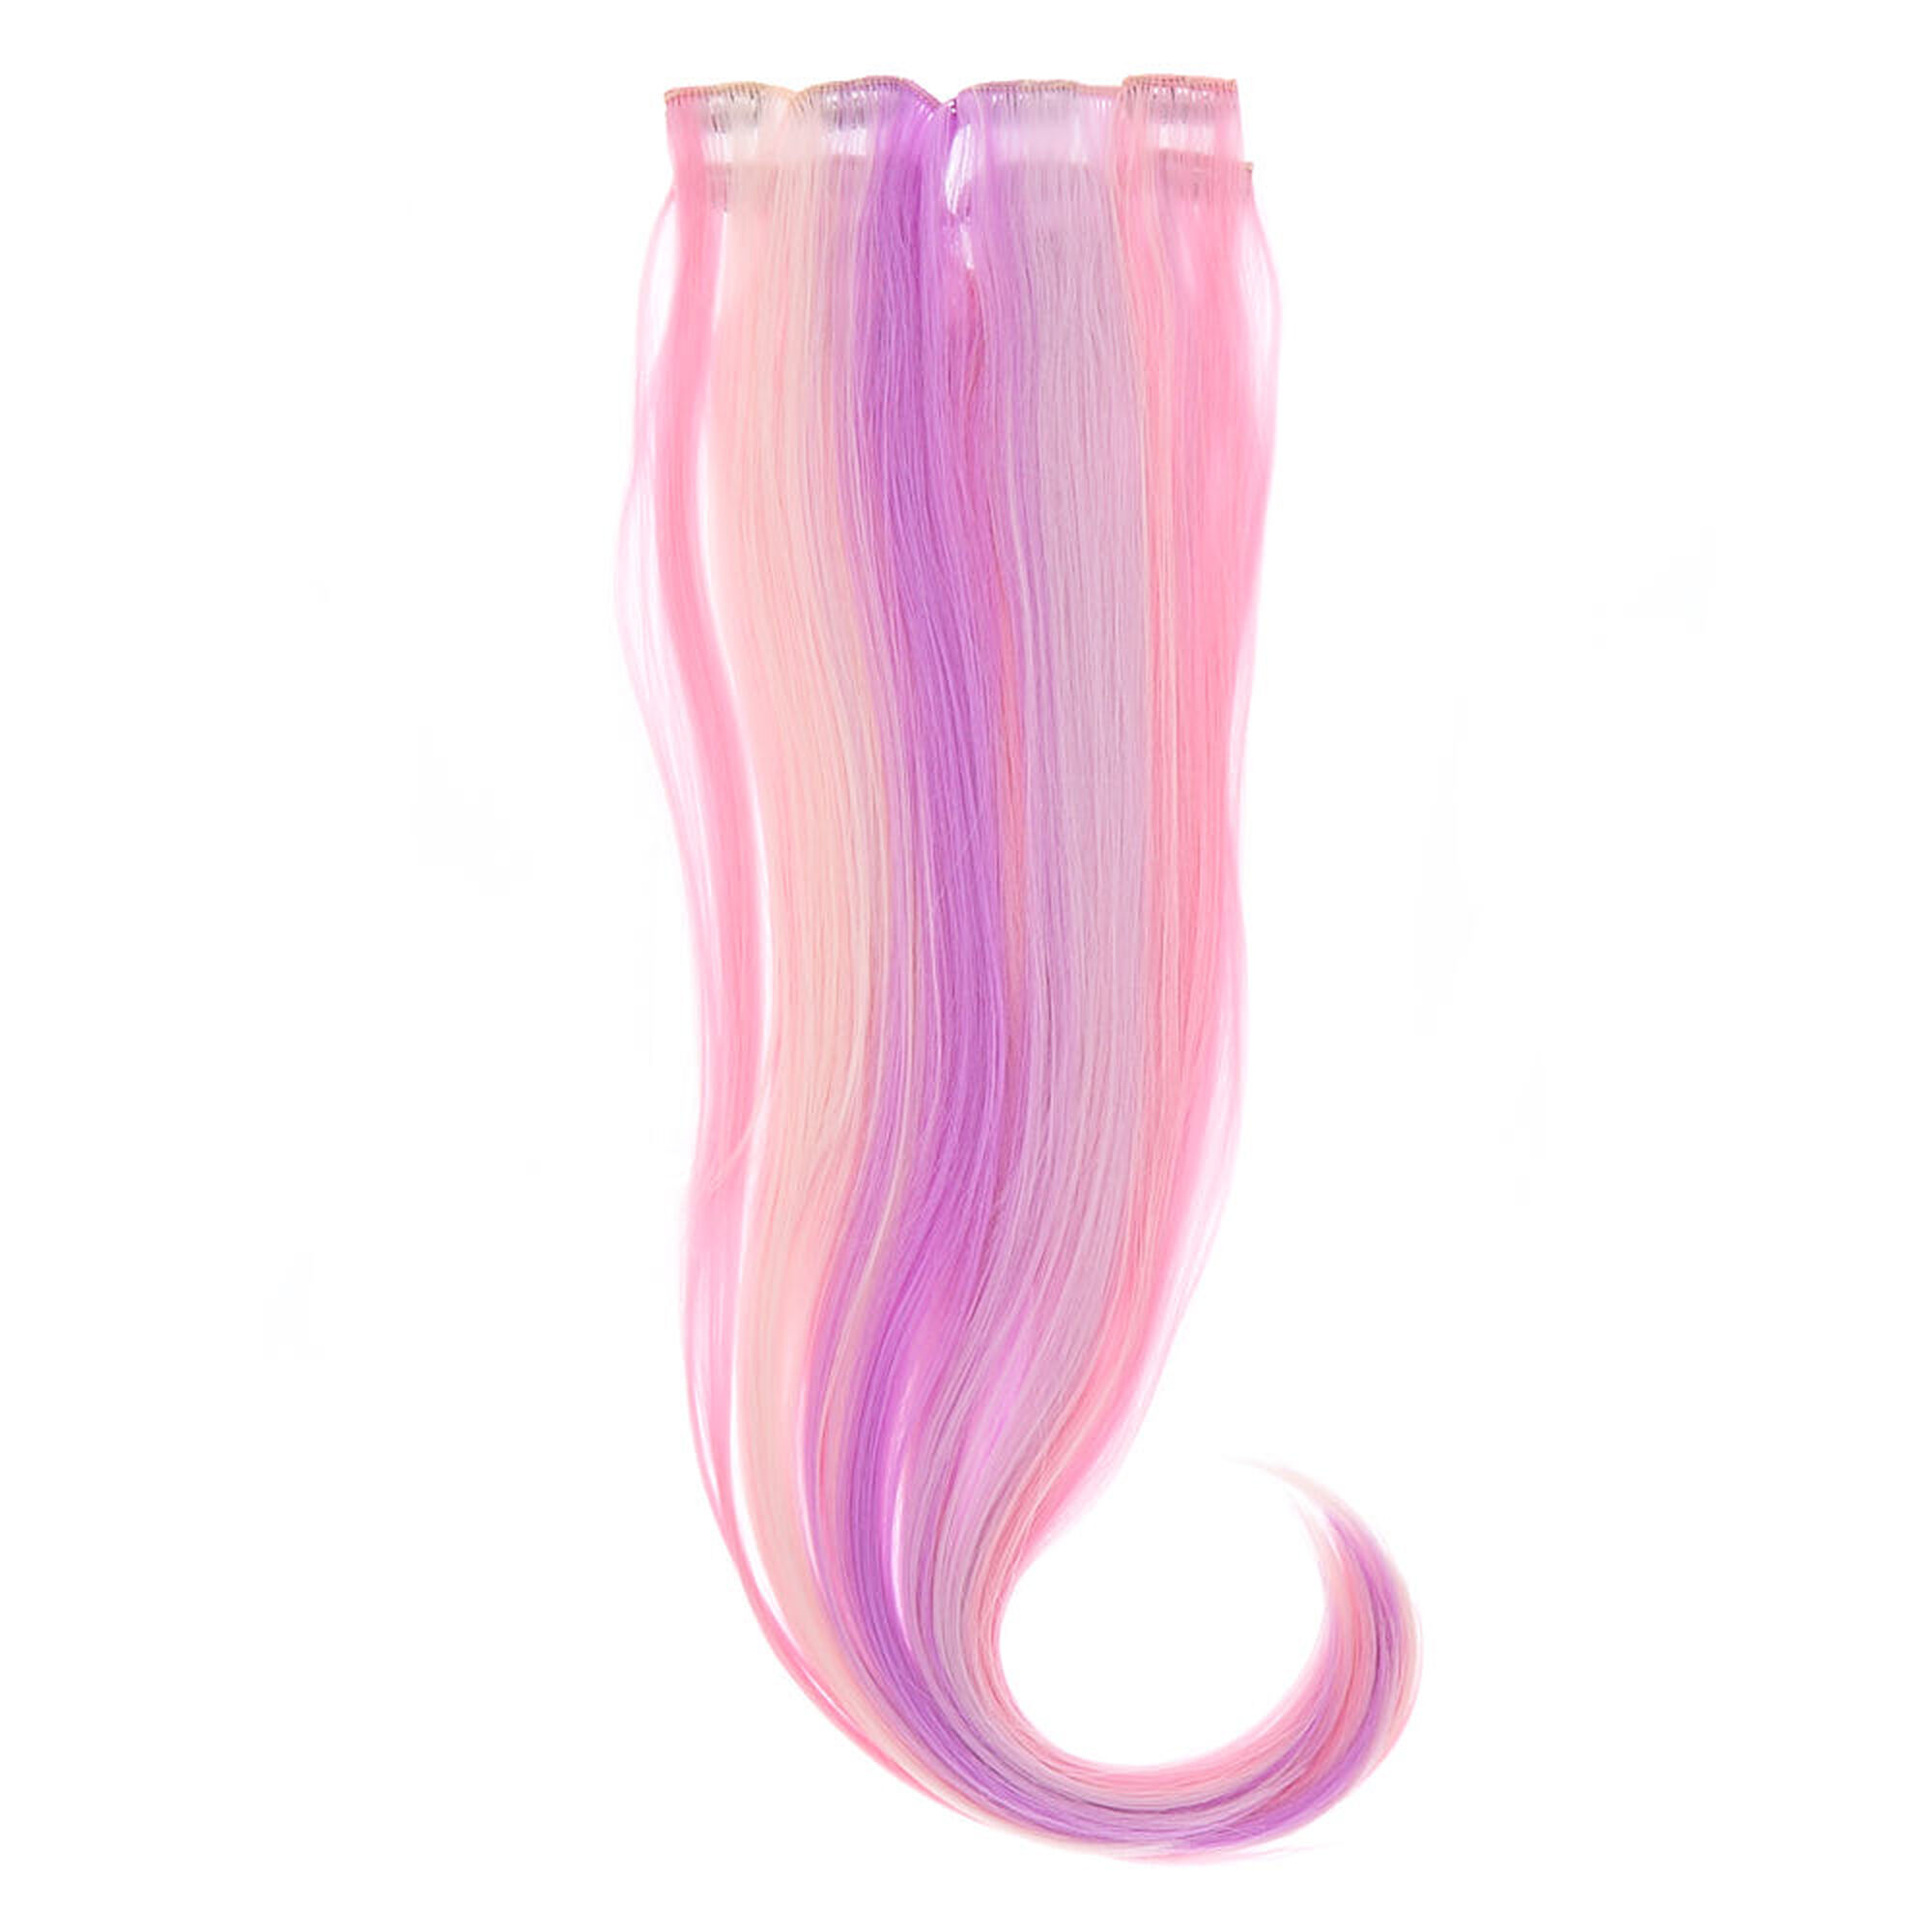 Faux Hair Clip In Extensions - Pink, 4 Pack | Claire's